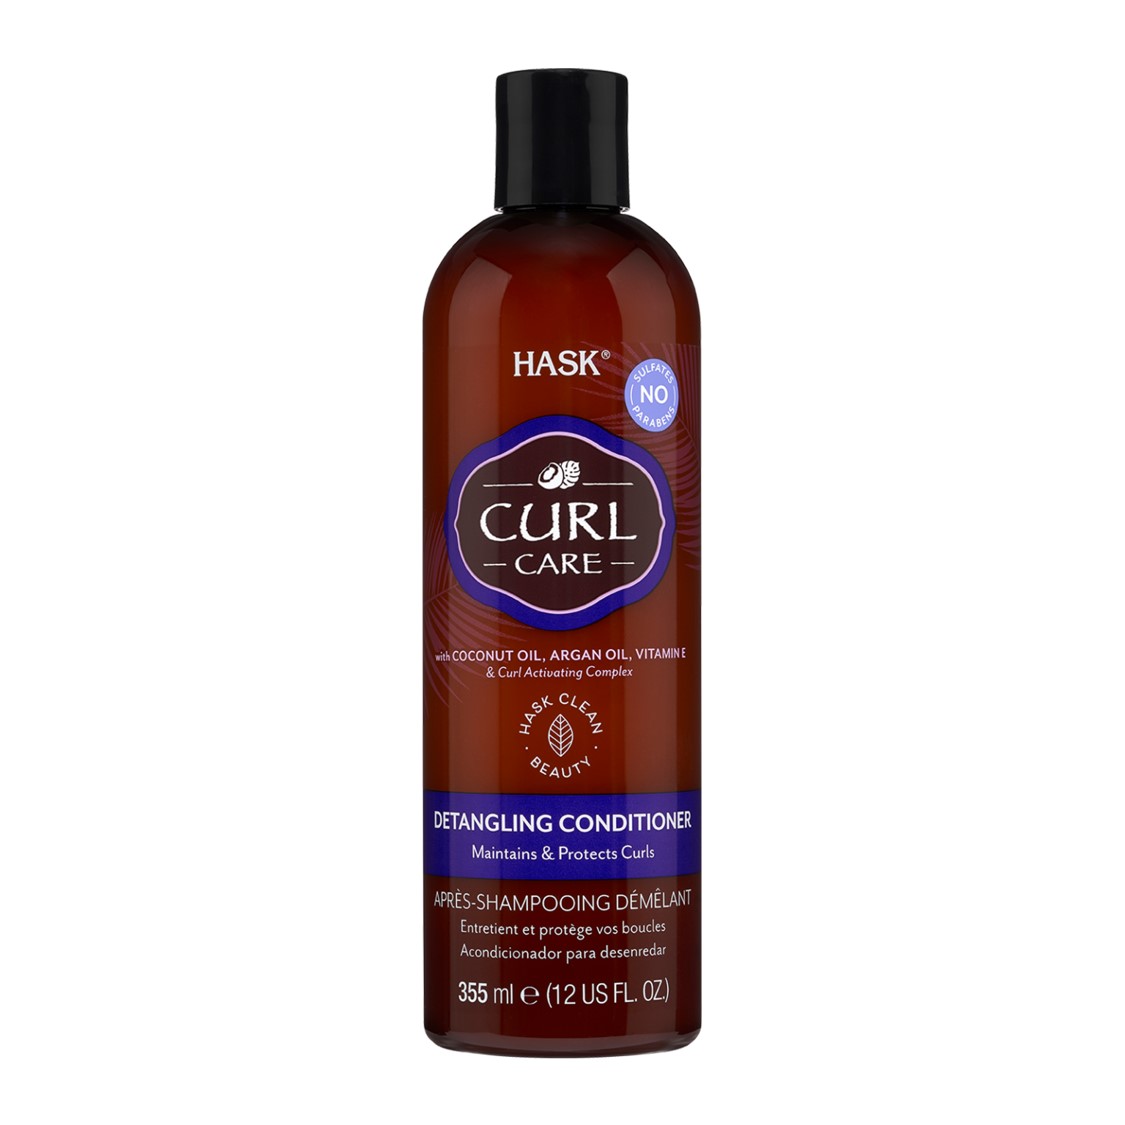 Balsam pentru protectie si intretinere bucle Curl Care, 355 ml, Hask